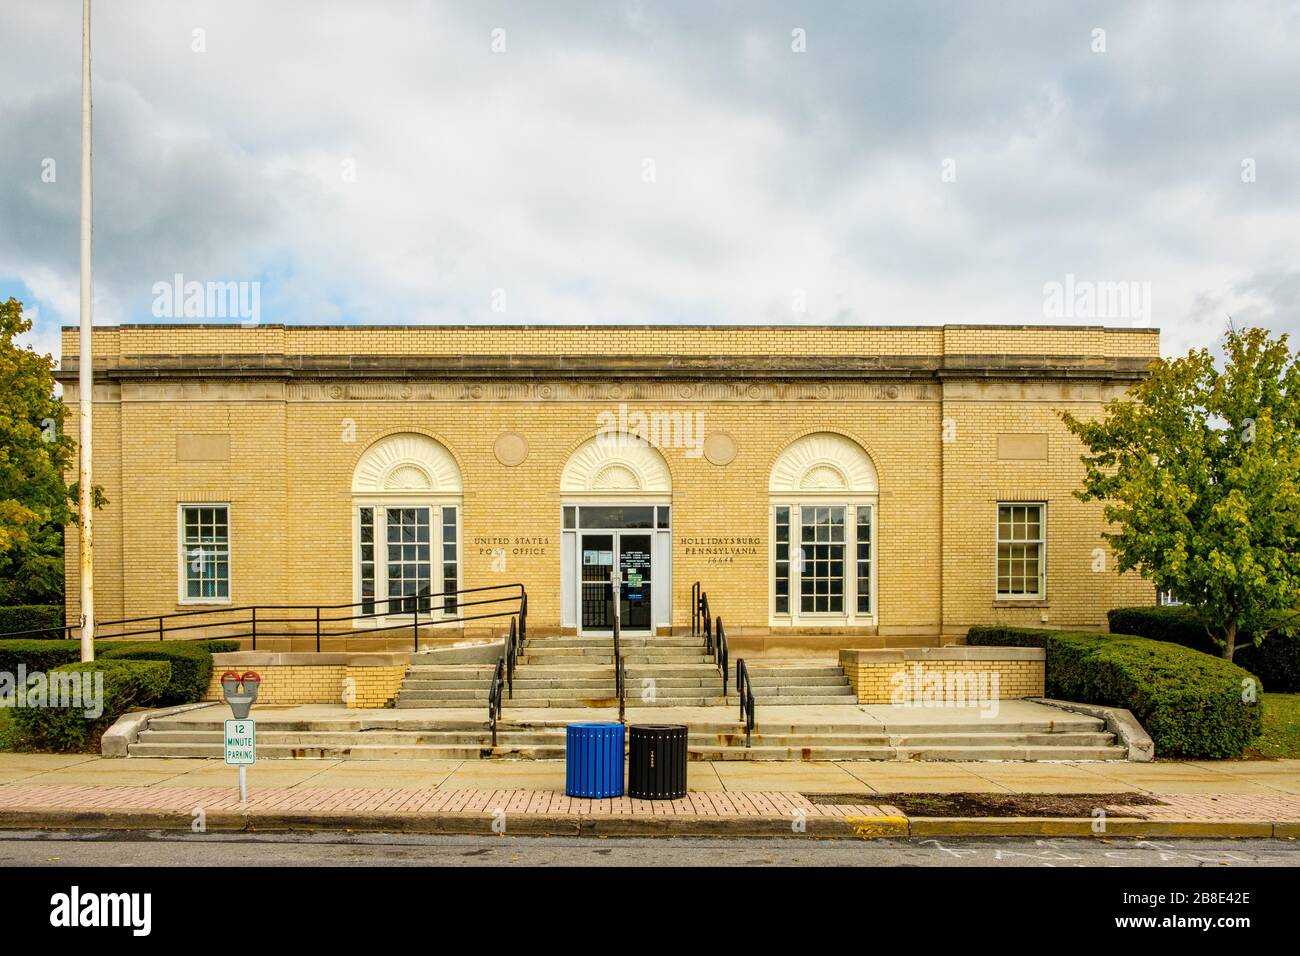 1910s post office building high resolution stock photography and images alamy alamy